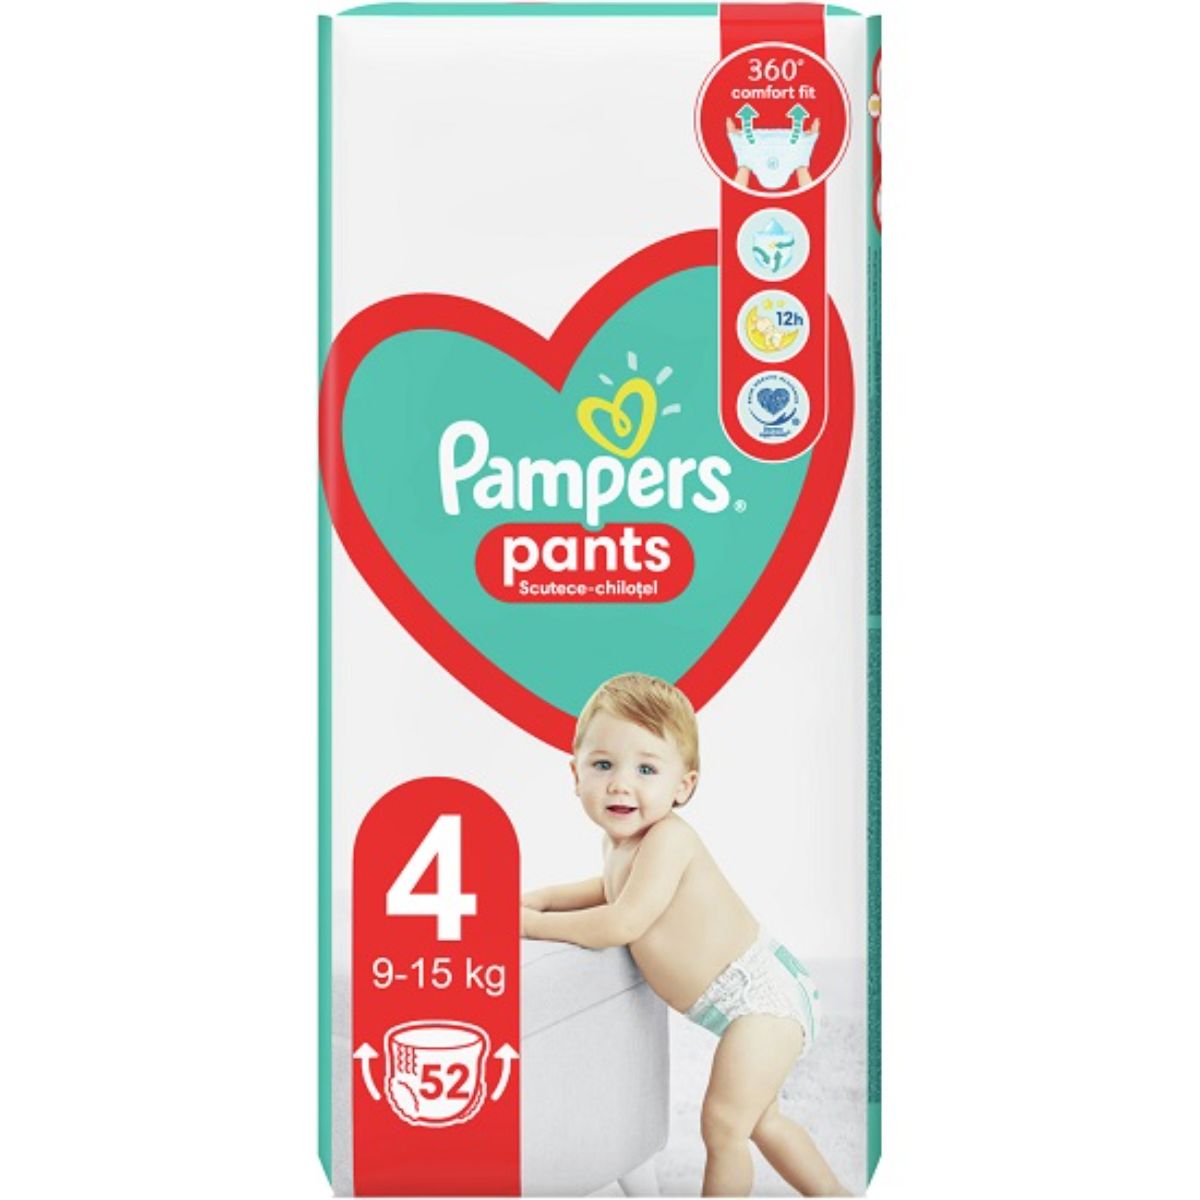 Scutece Pampers, 4 Chilotel Act Baby 9-15 kg, 52 buc noriel.ro